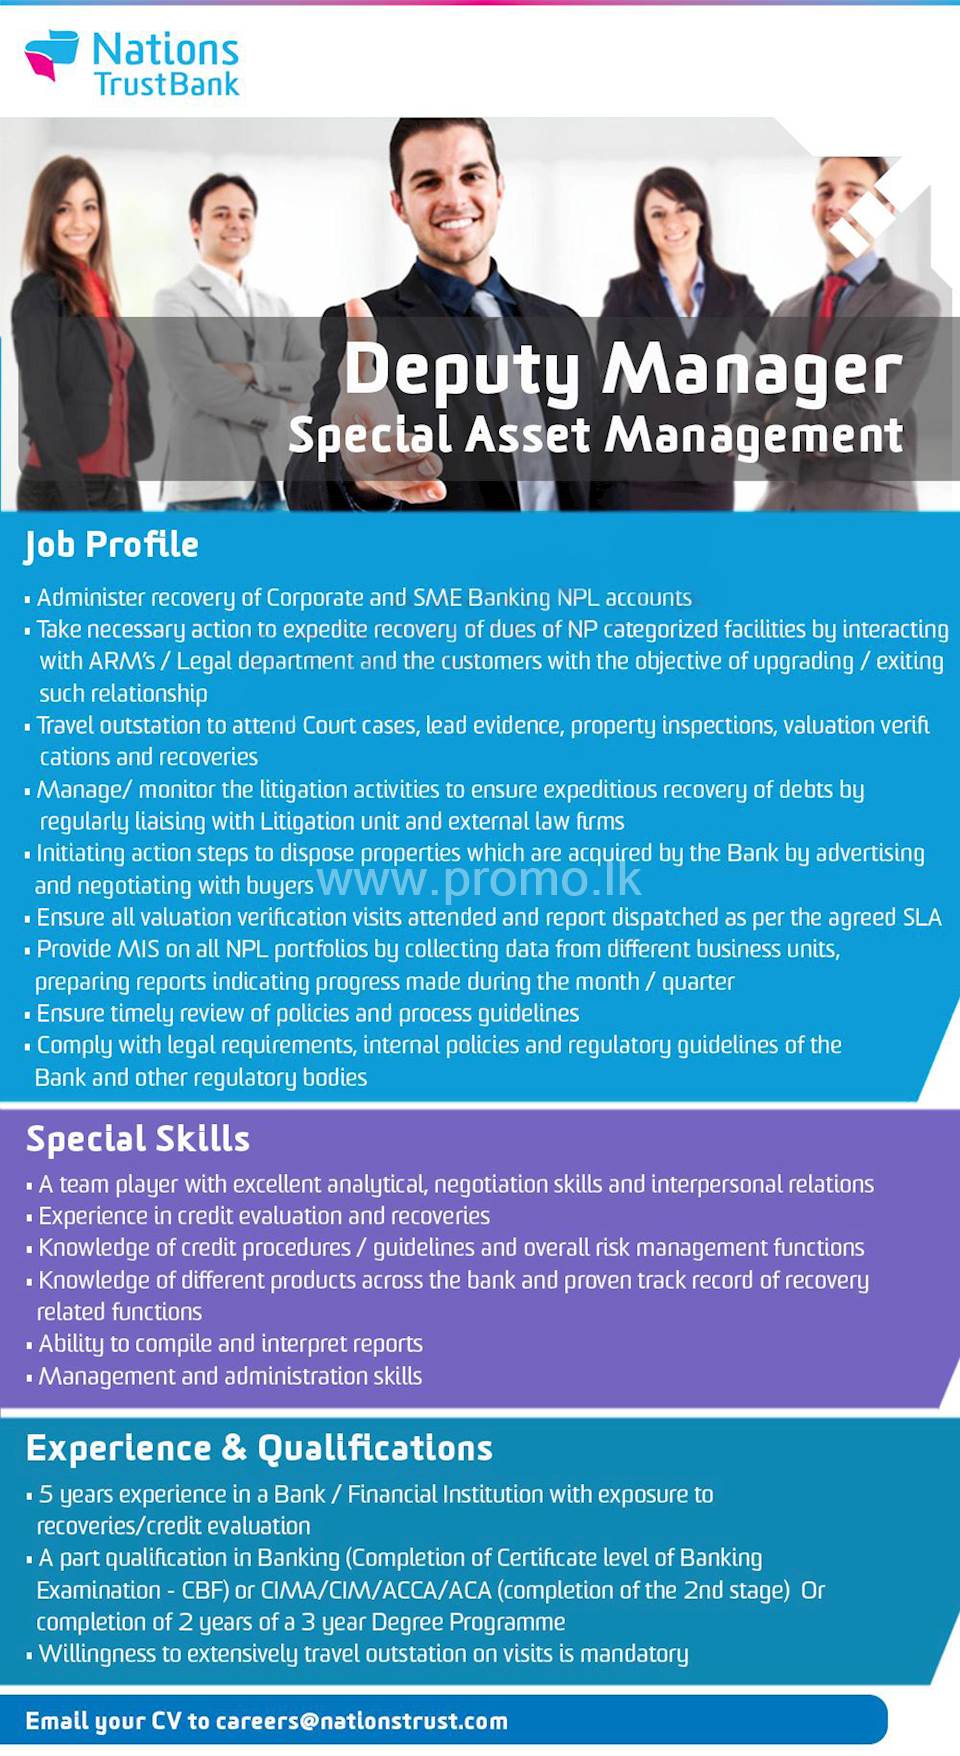 Deputy Manager Special Asset Management At Nations Trust Bank